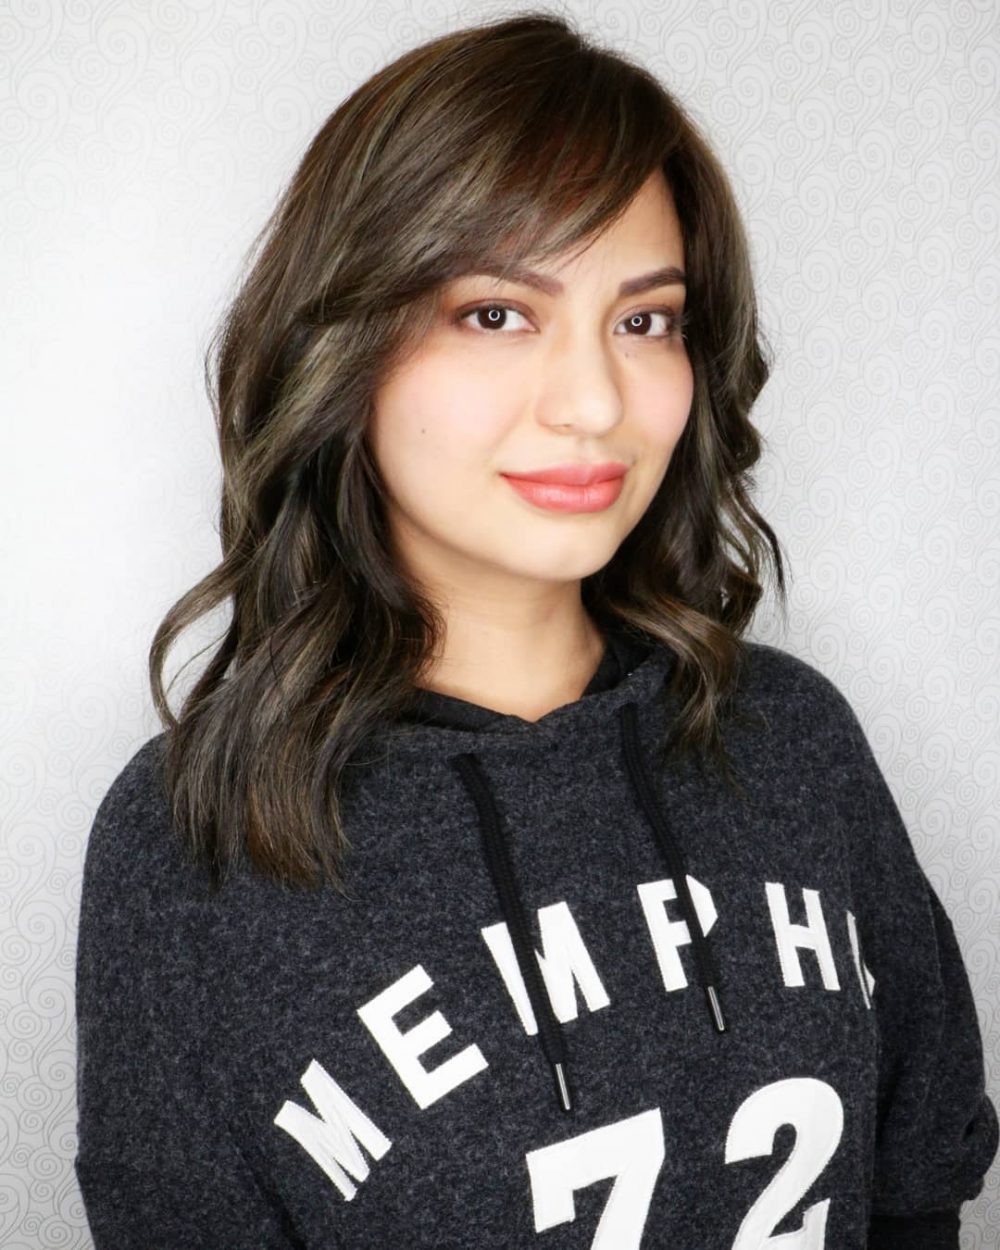 51 Side-Swept Bangs to Try When You're Bored With Your Hair